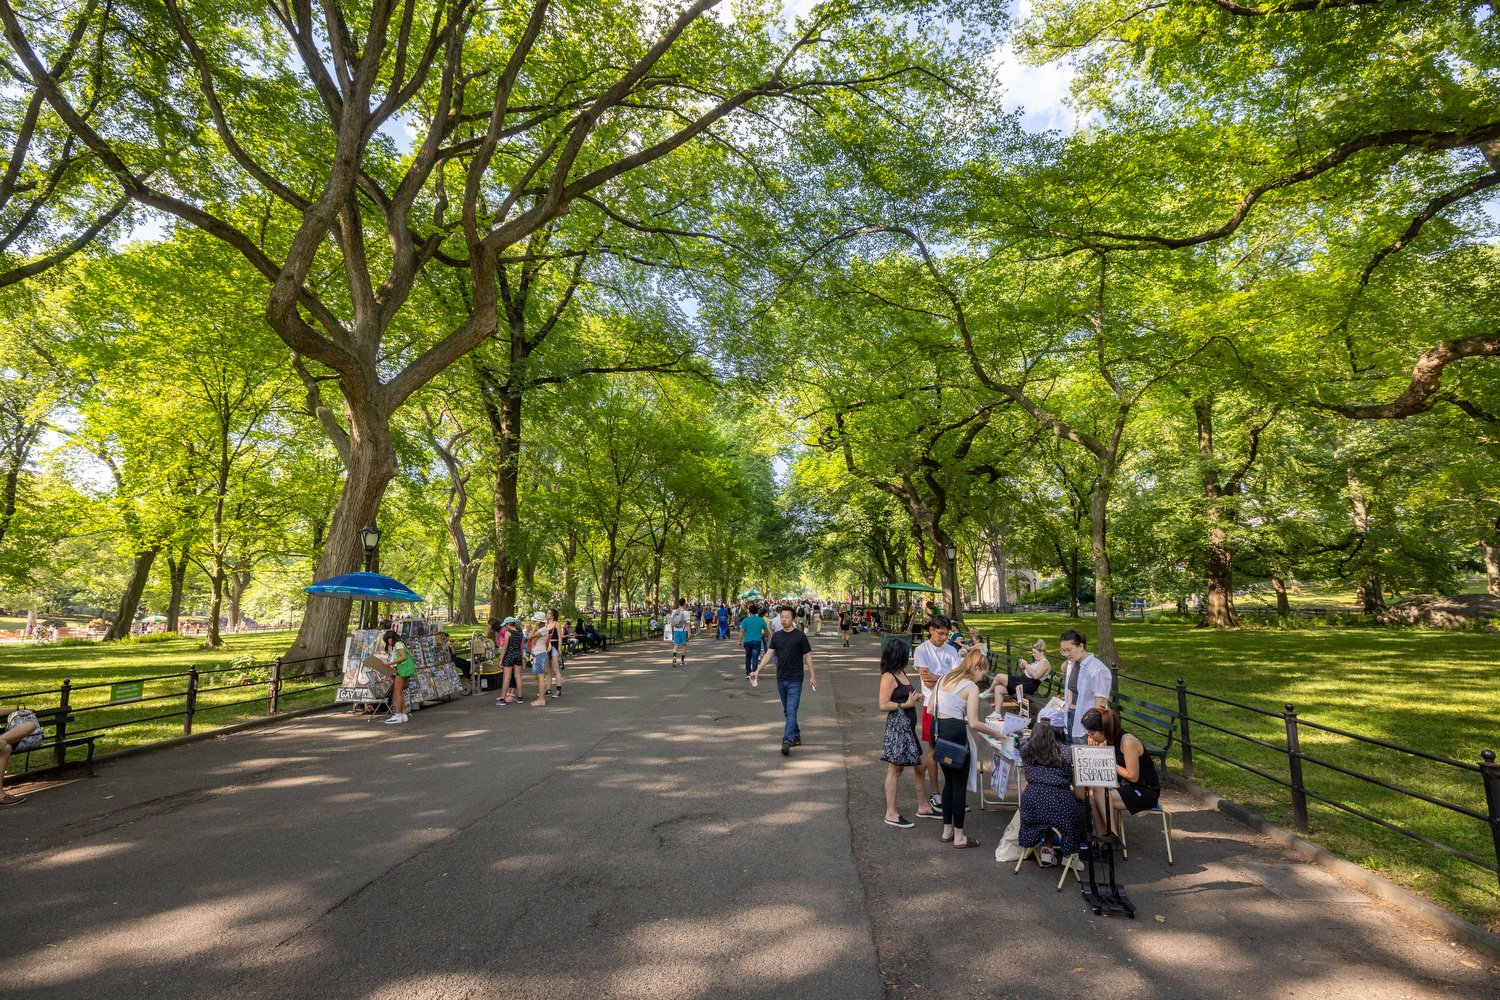 A Stroll Through Central Park in NYC